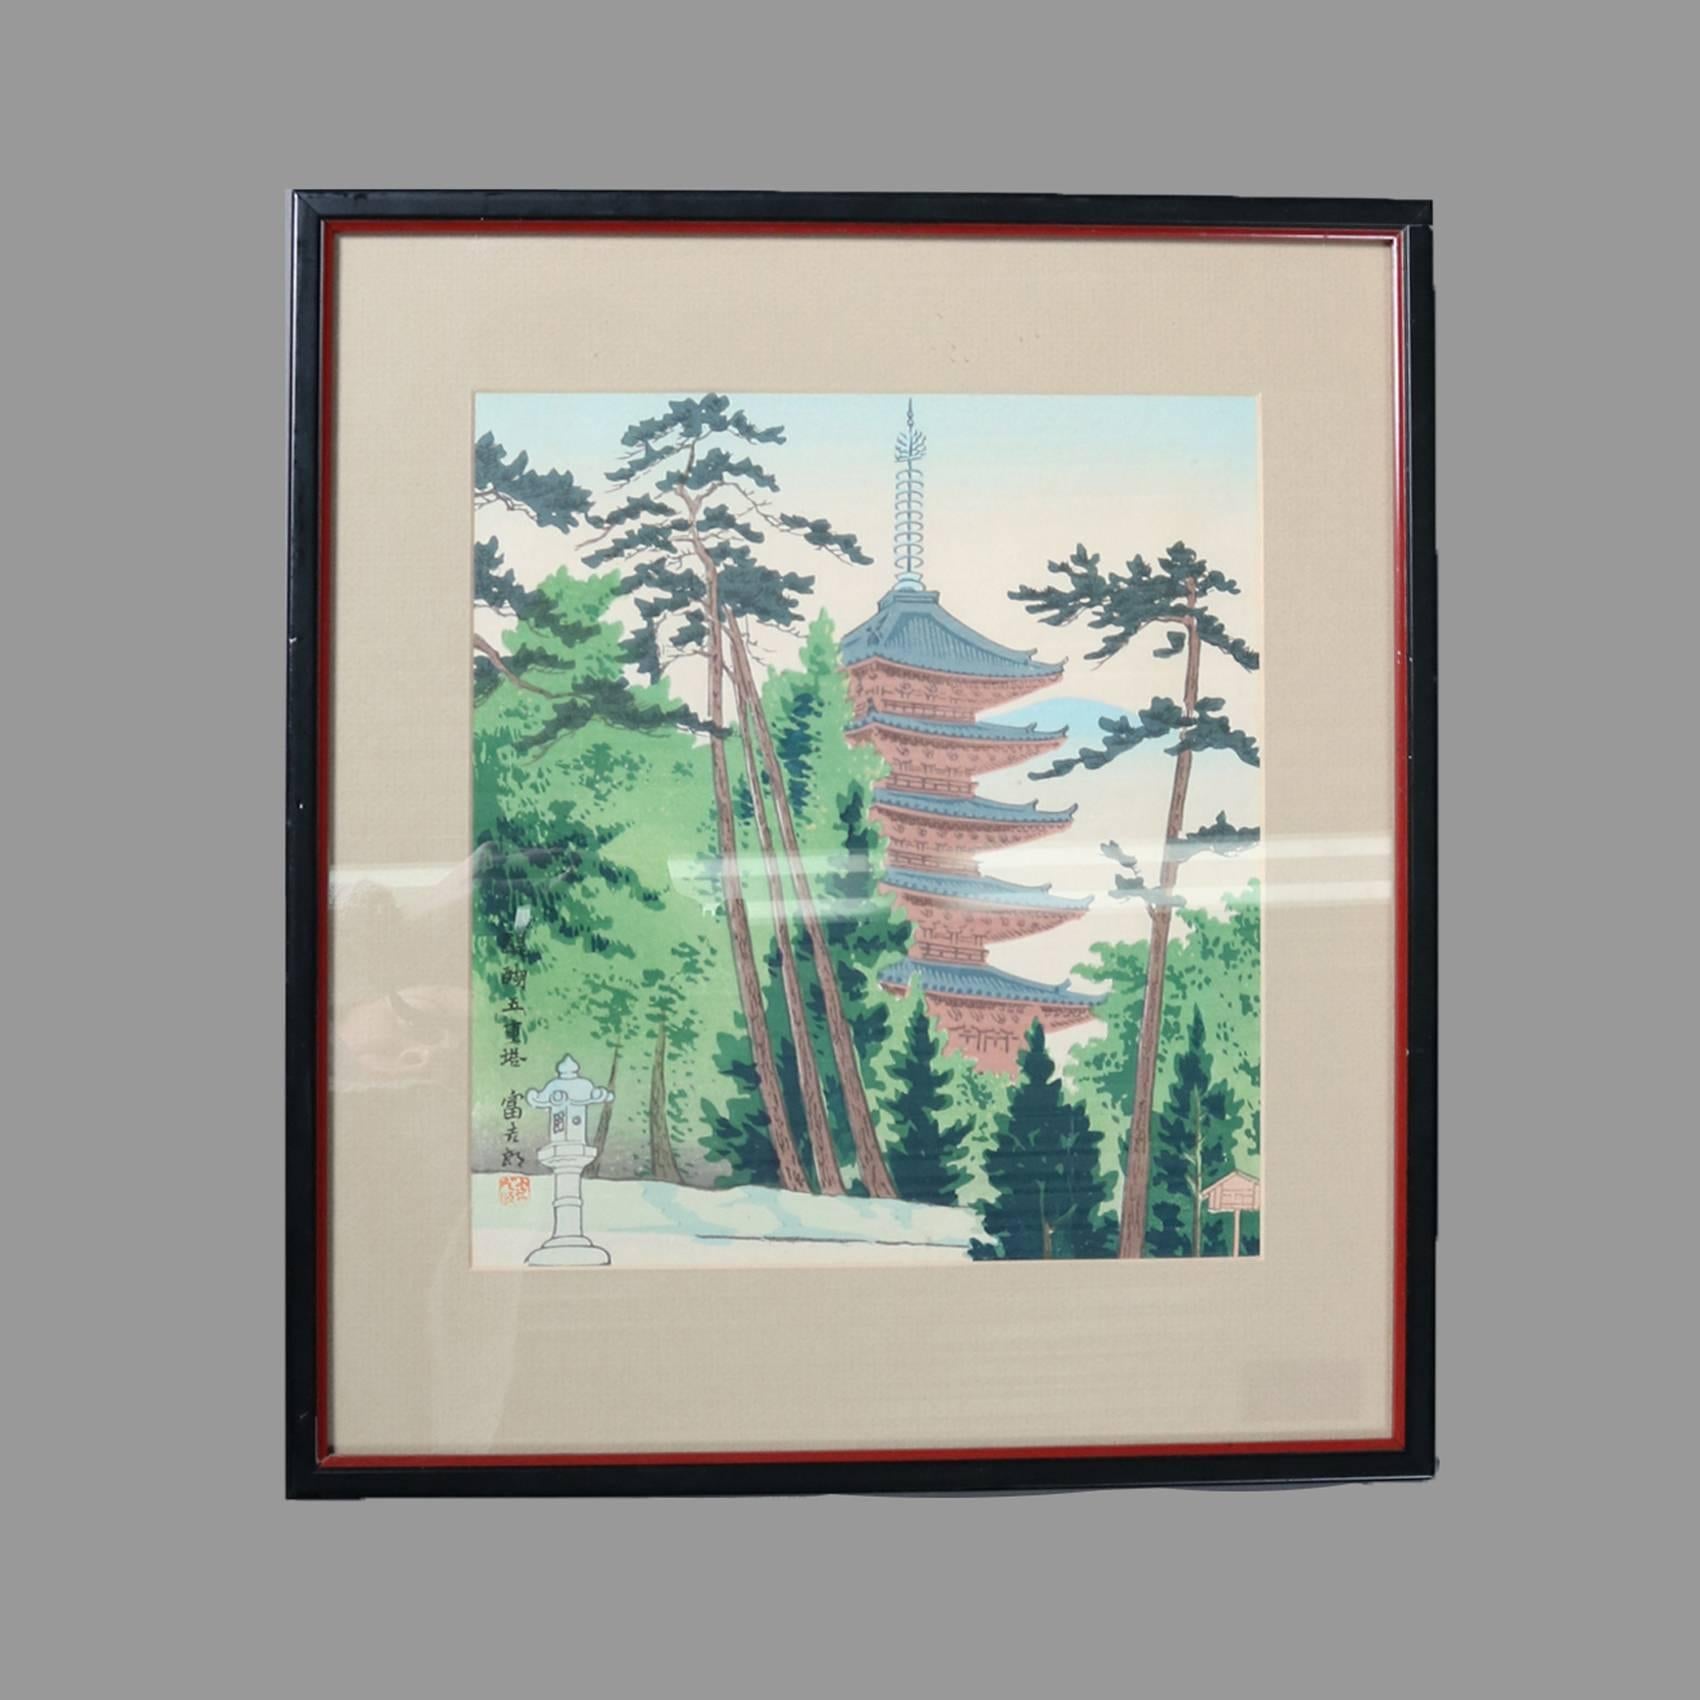 Set of four Japanese hand-painted watercolored wood block prints by Tomikichiro Tokuriki depict village and countryside scenes with pagodas and other structures, chop mark and stamp signed, 20th century

Measures - fr: 15.75" h x 14" w x